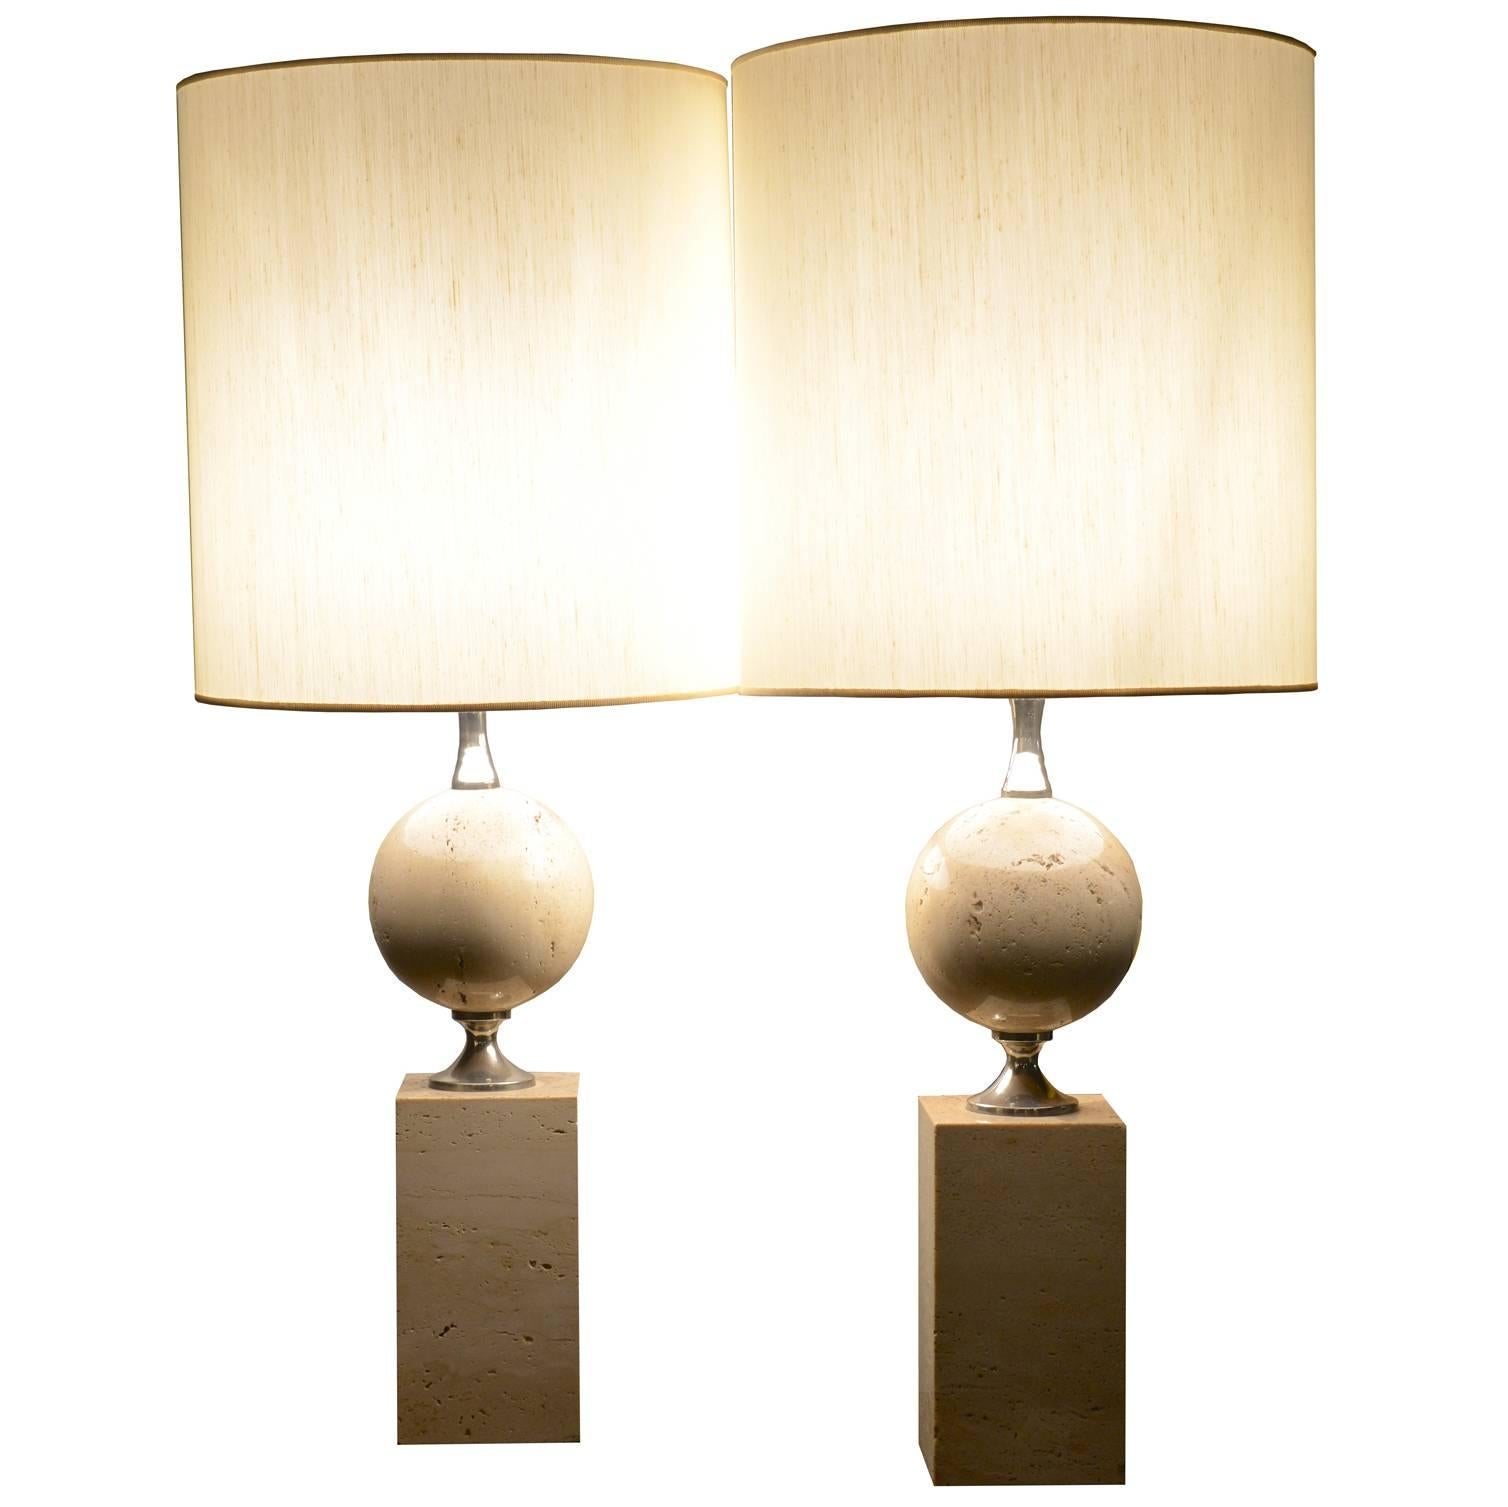 Pair of Maison Barbier Table Lamps in Polished Travertine and Chrome